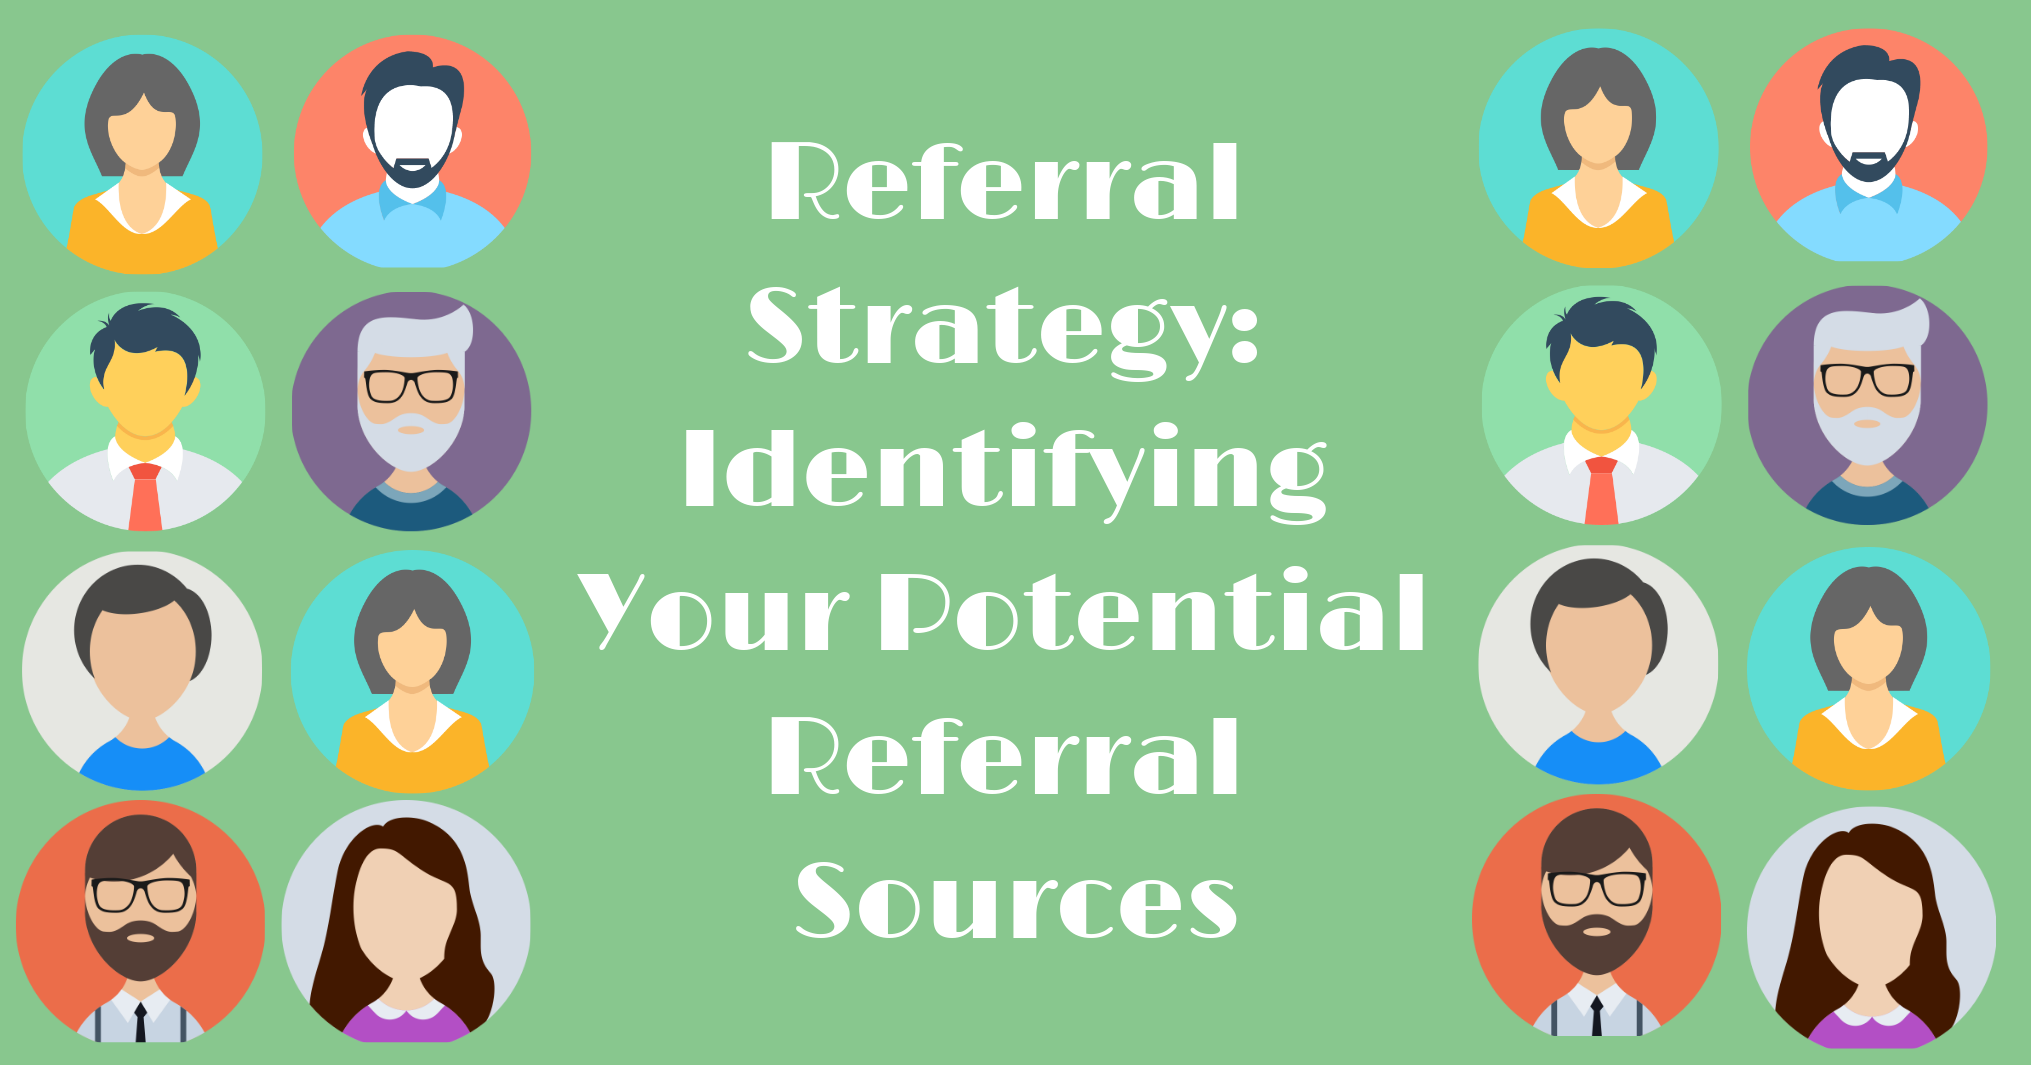 Referral Strategy: Identifying Your Potential Referral Sources